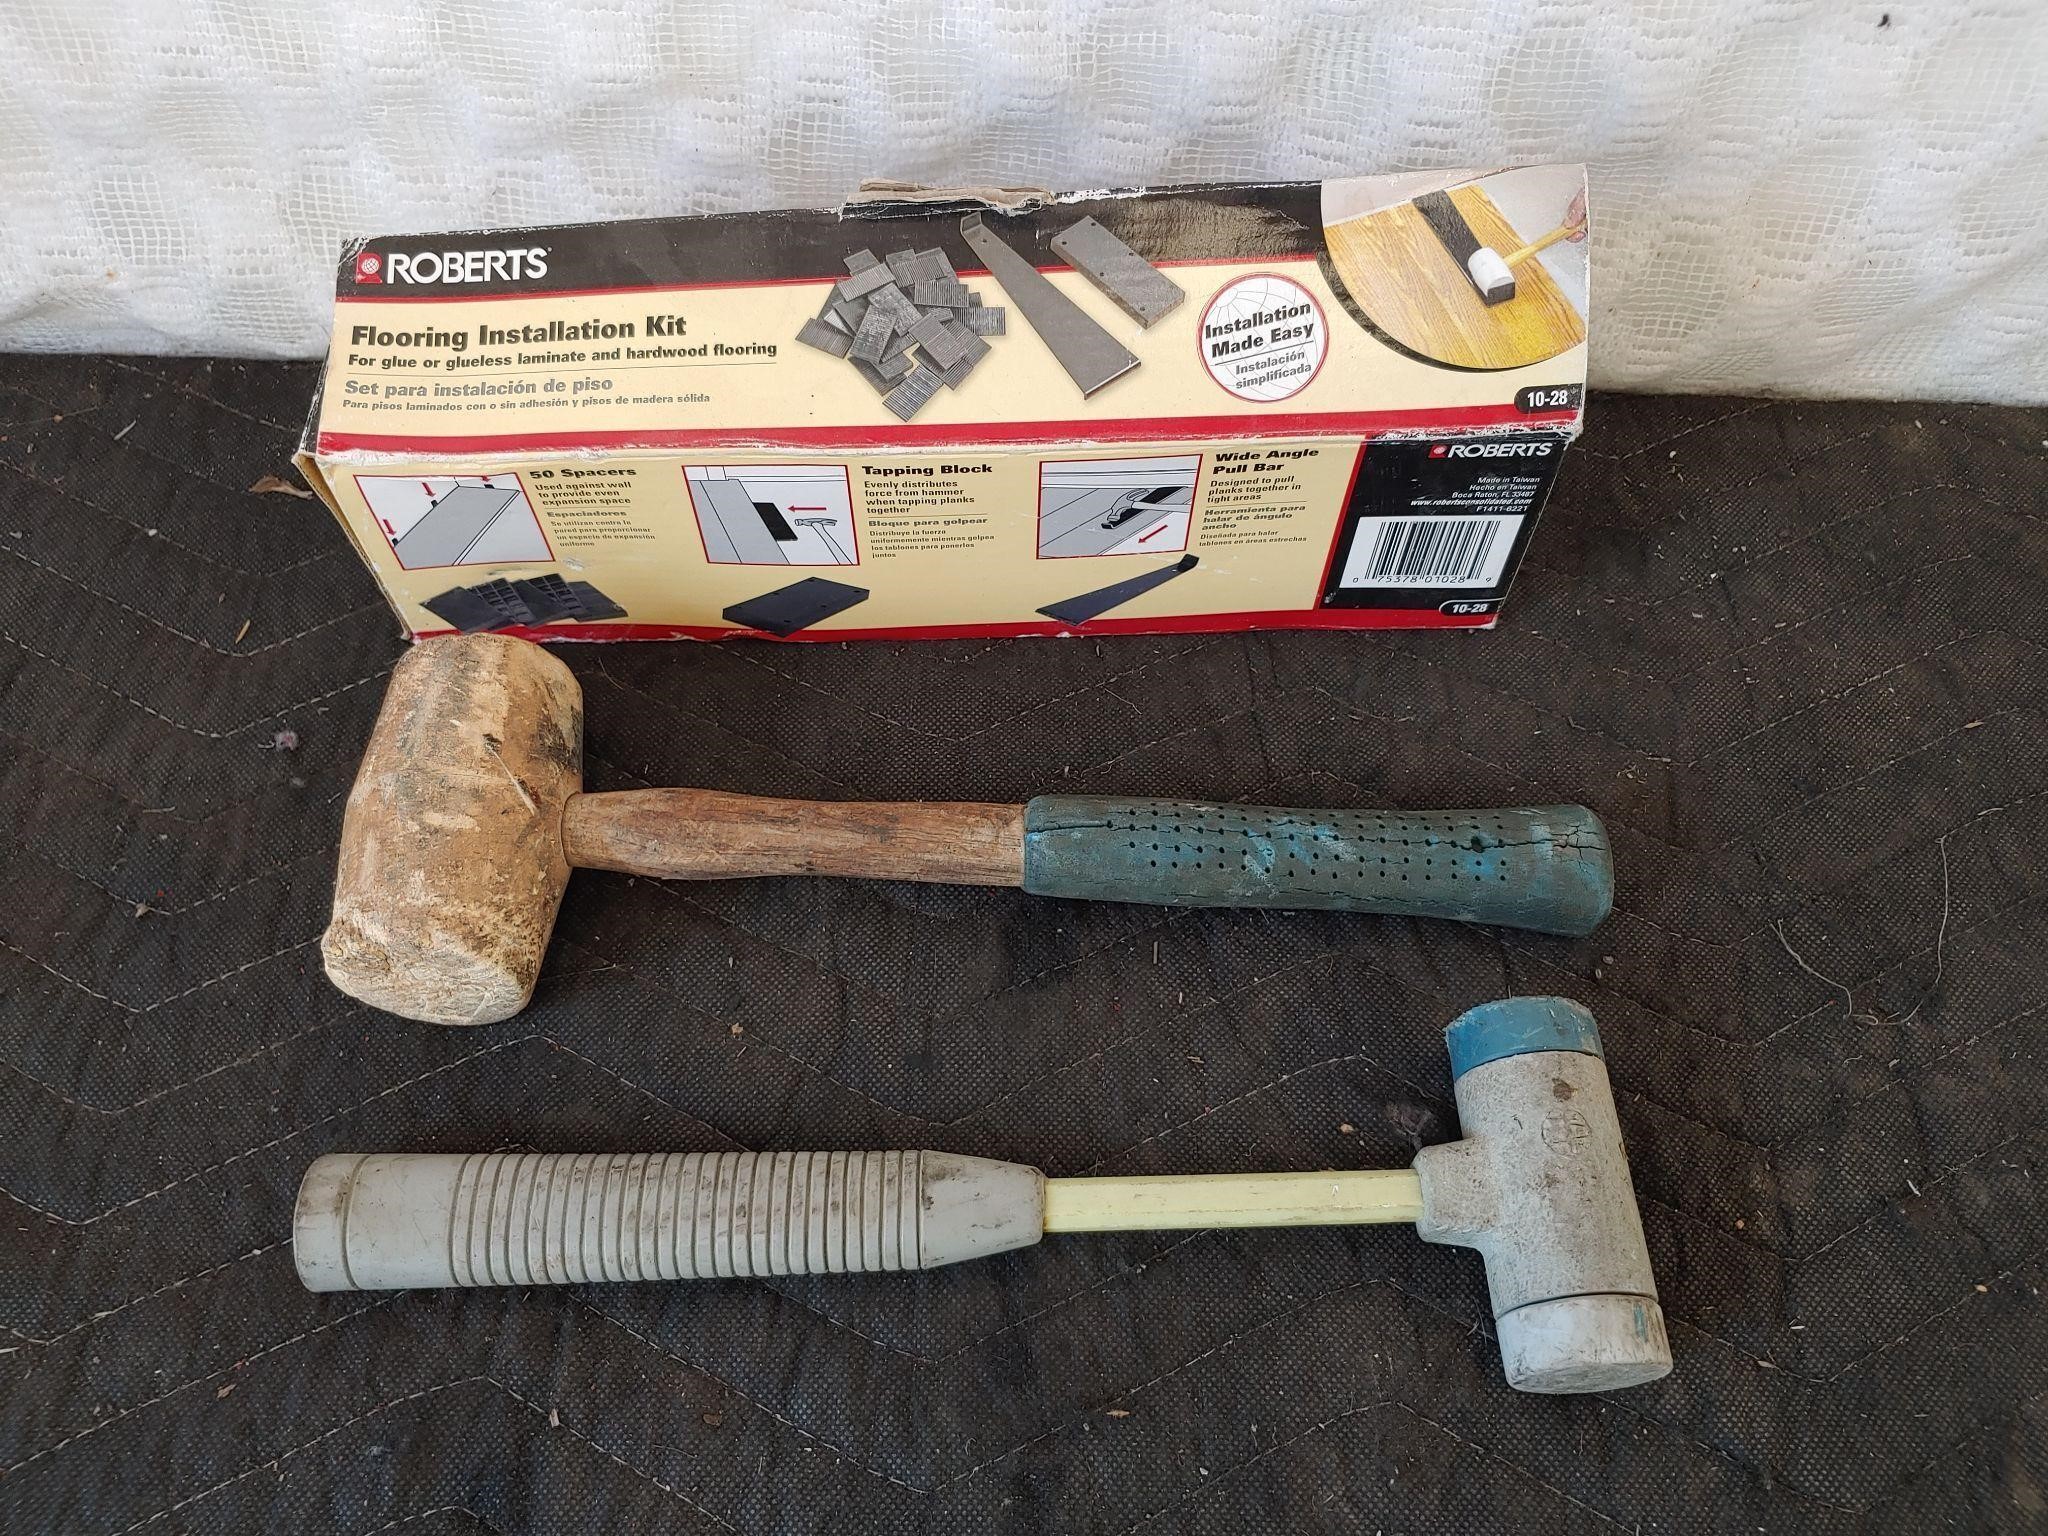 Roberts Flooring Installation Kit and hammers